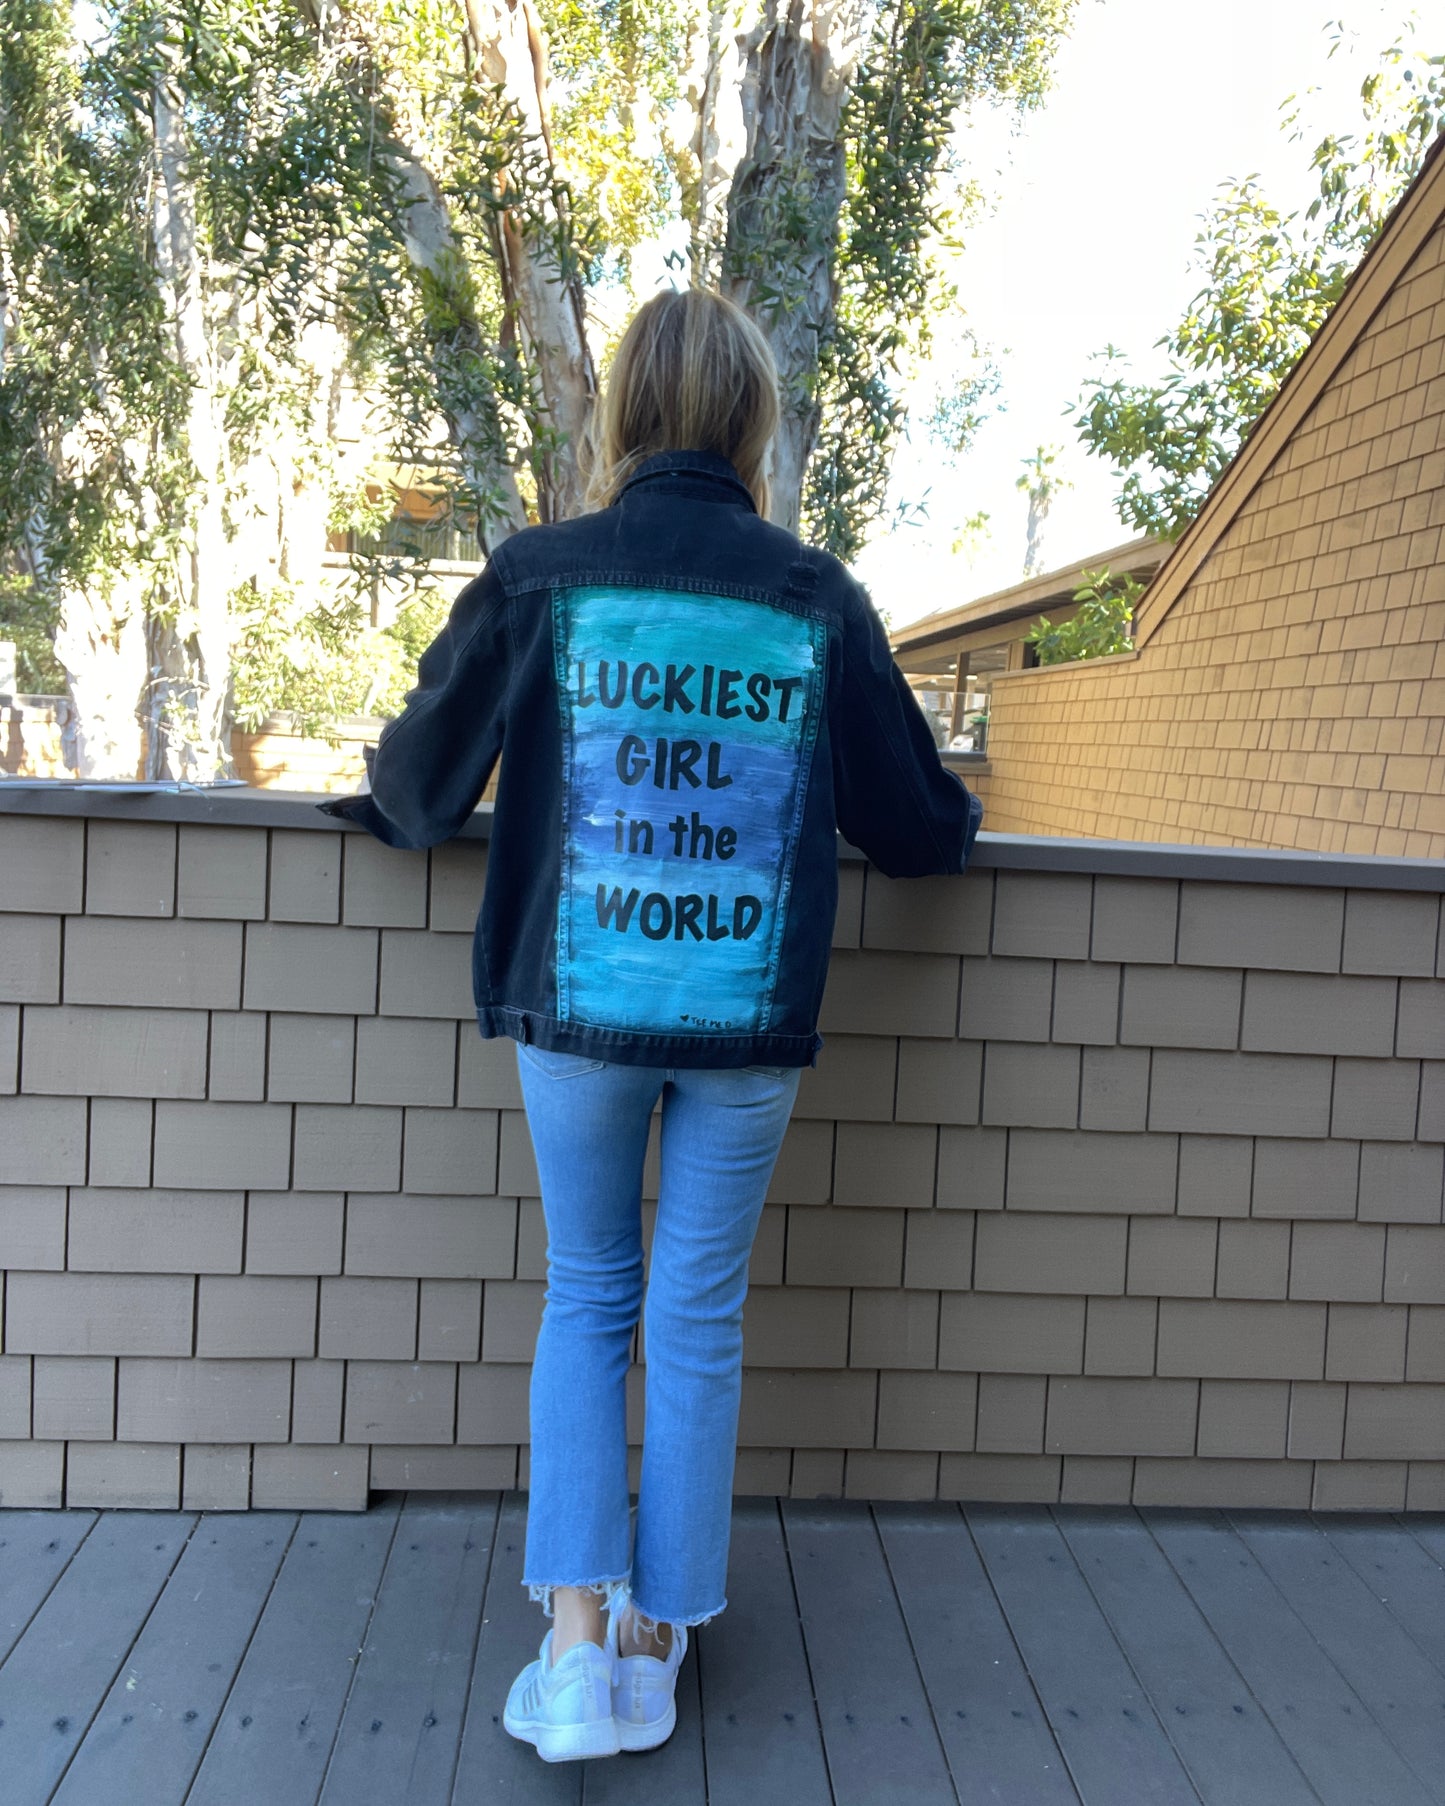 LUCKIEST GIRL Cheers to me! - Hand painted jacket